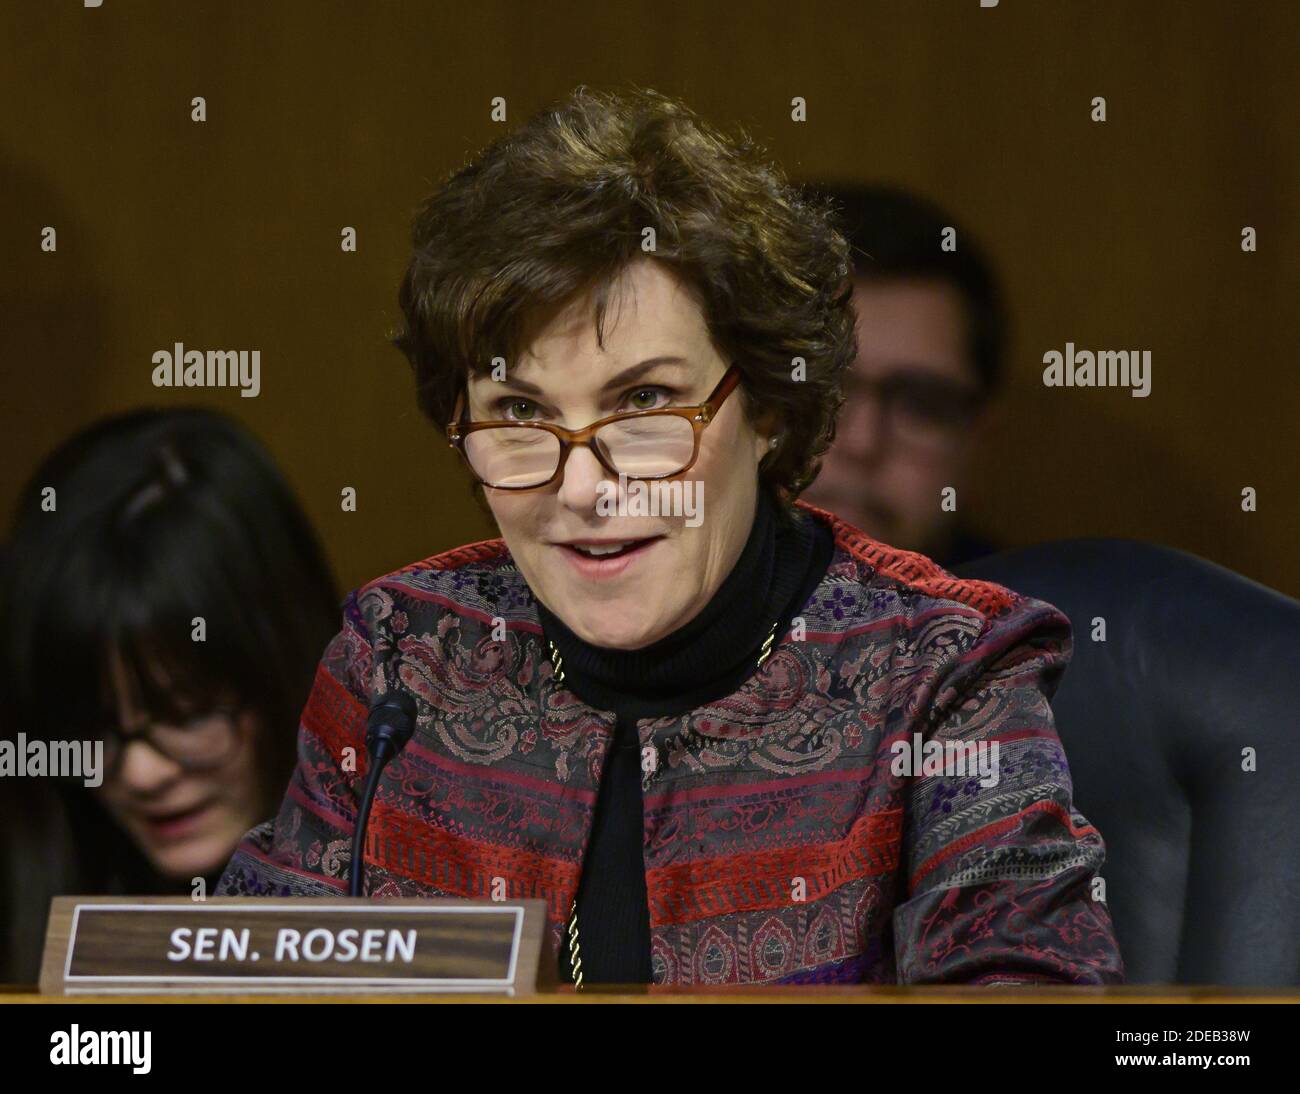 United States Senator Jacky Rosen (Democrat of Nevada) questions witnesses as they testify before the US Senate Committee on Homeland Security and Governmental Affairs Permanent Subcommittee on Investigations during a hearing on 'Examining Private Sector Data Breaches' on Capitol Hill in Washington, DC on Thursday, March 7, 2019.Photo by Ron Sachs/CNP/ABACAPRESS.COM Stock Photo